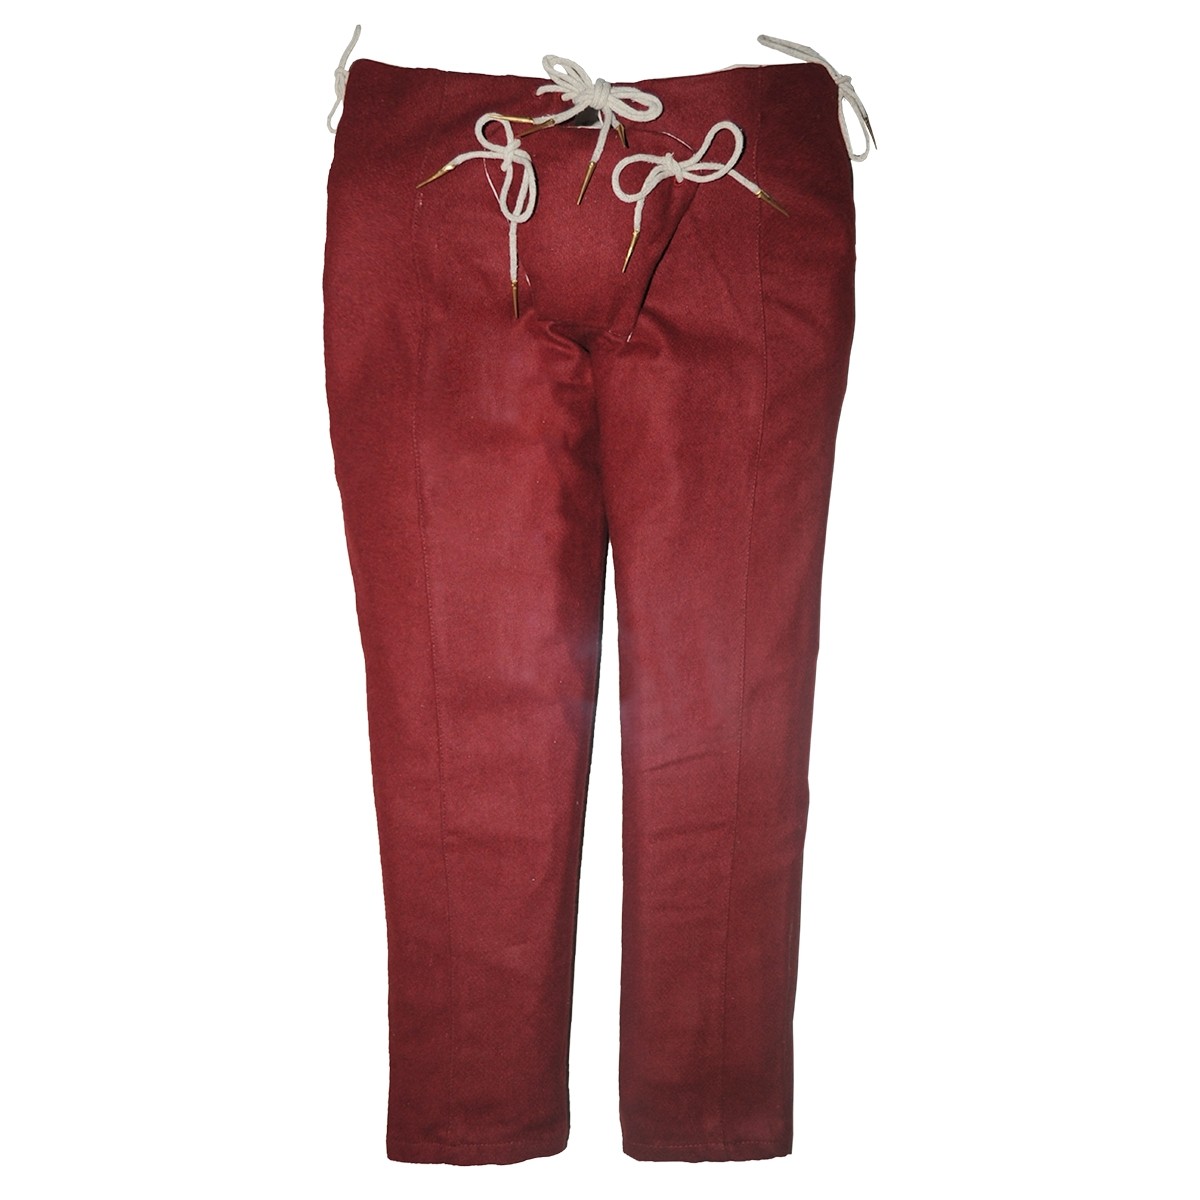 Man's 15th C. Trousers - Maroon